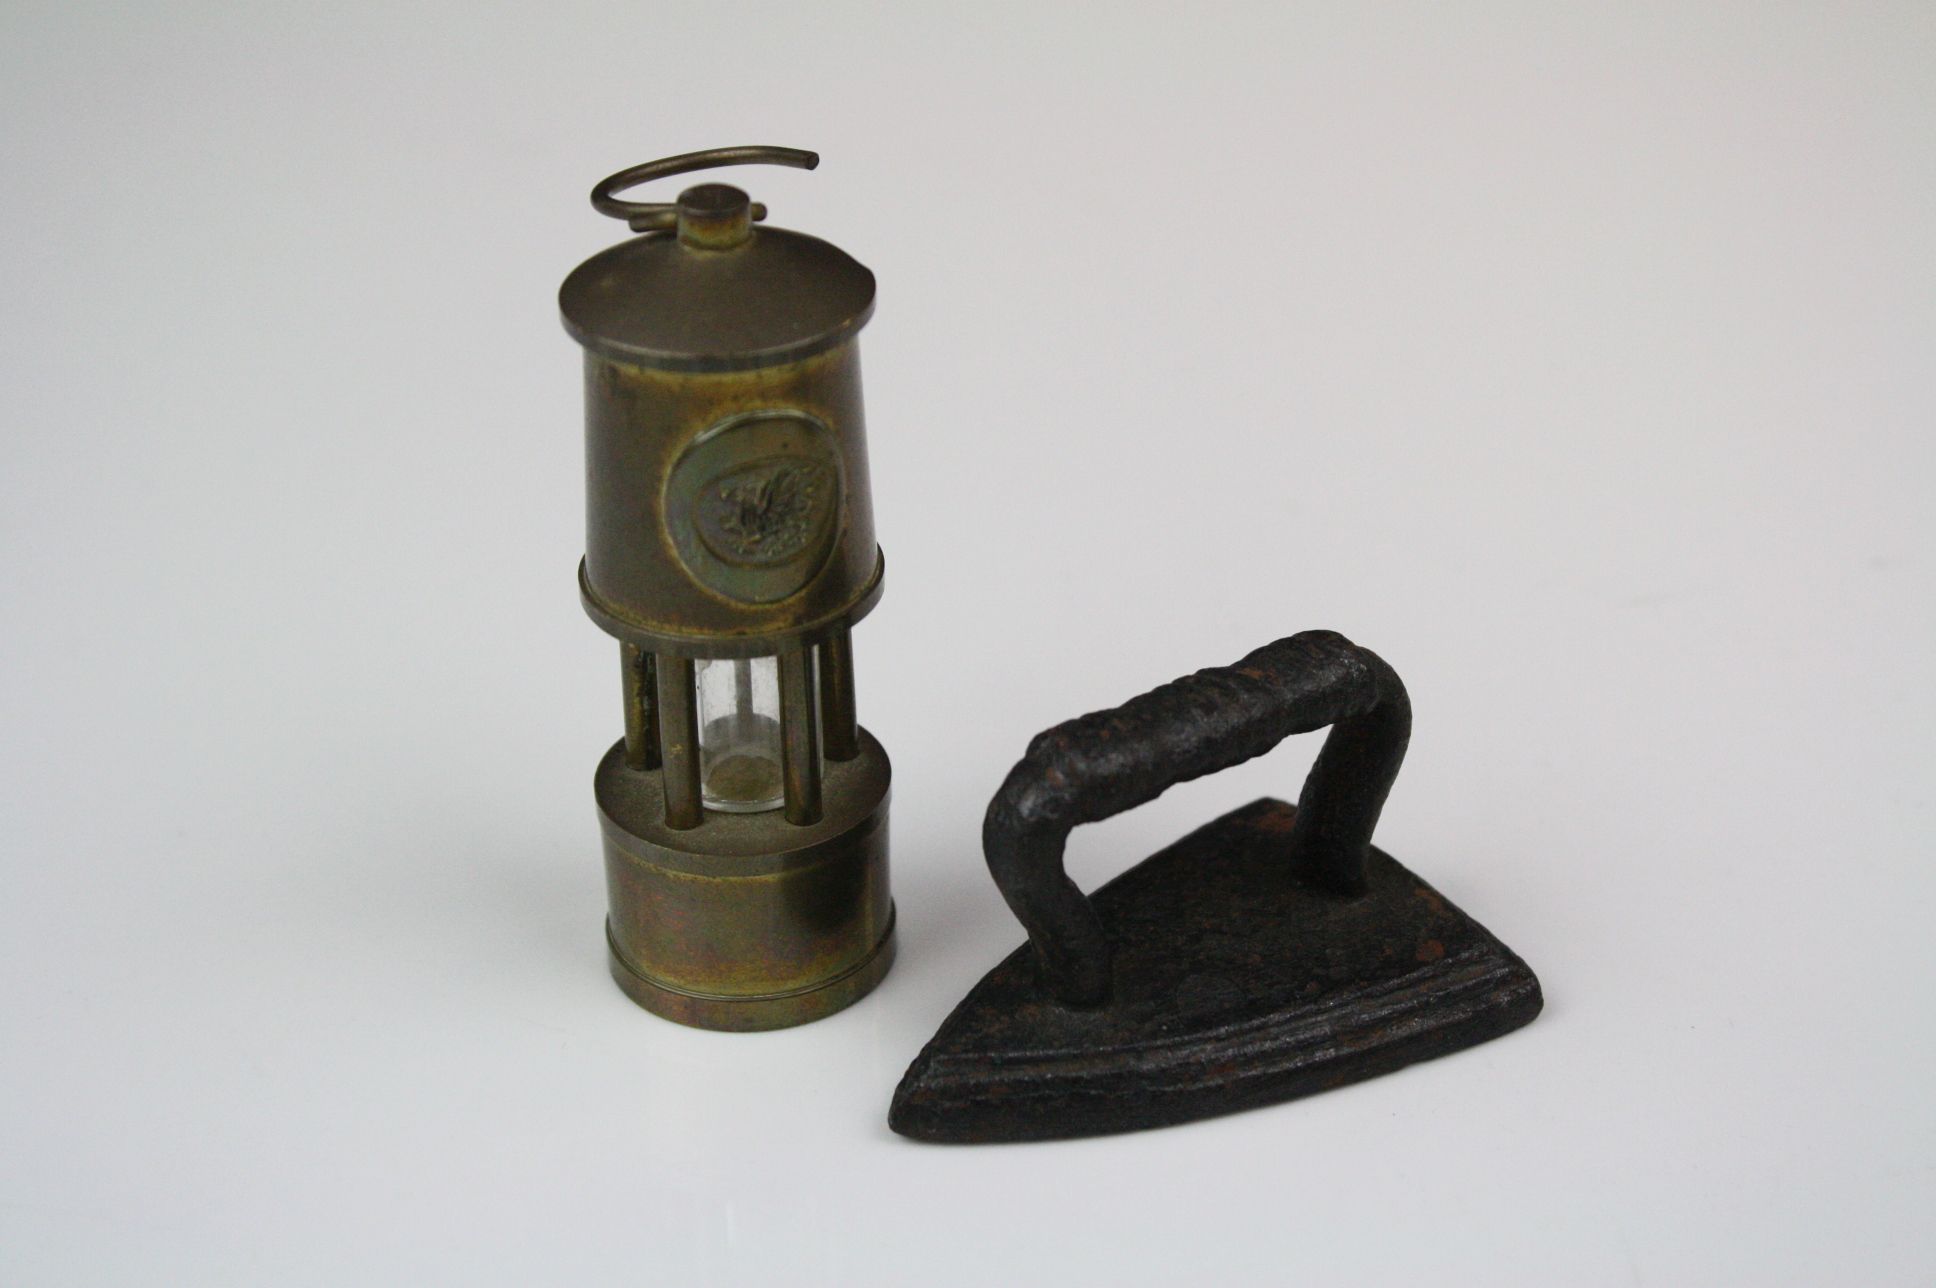 Miniature brass minors lamp together with a miniature flat iron.